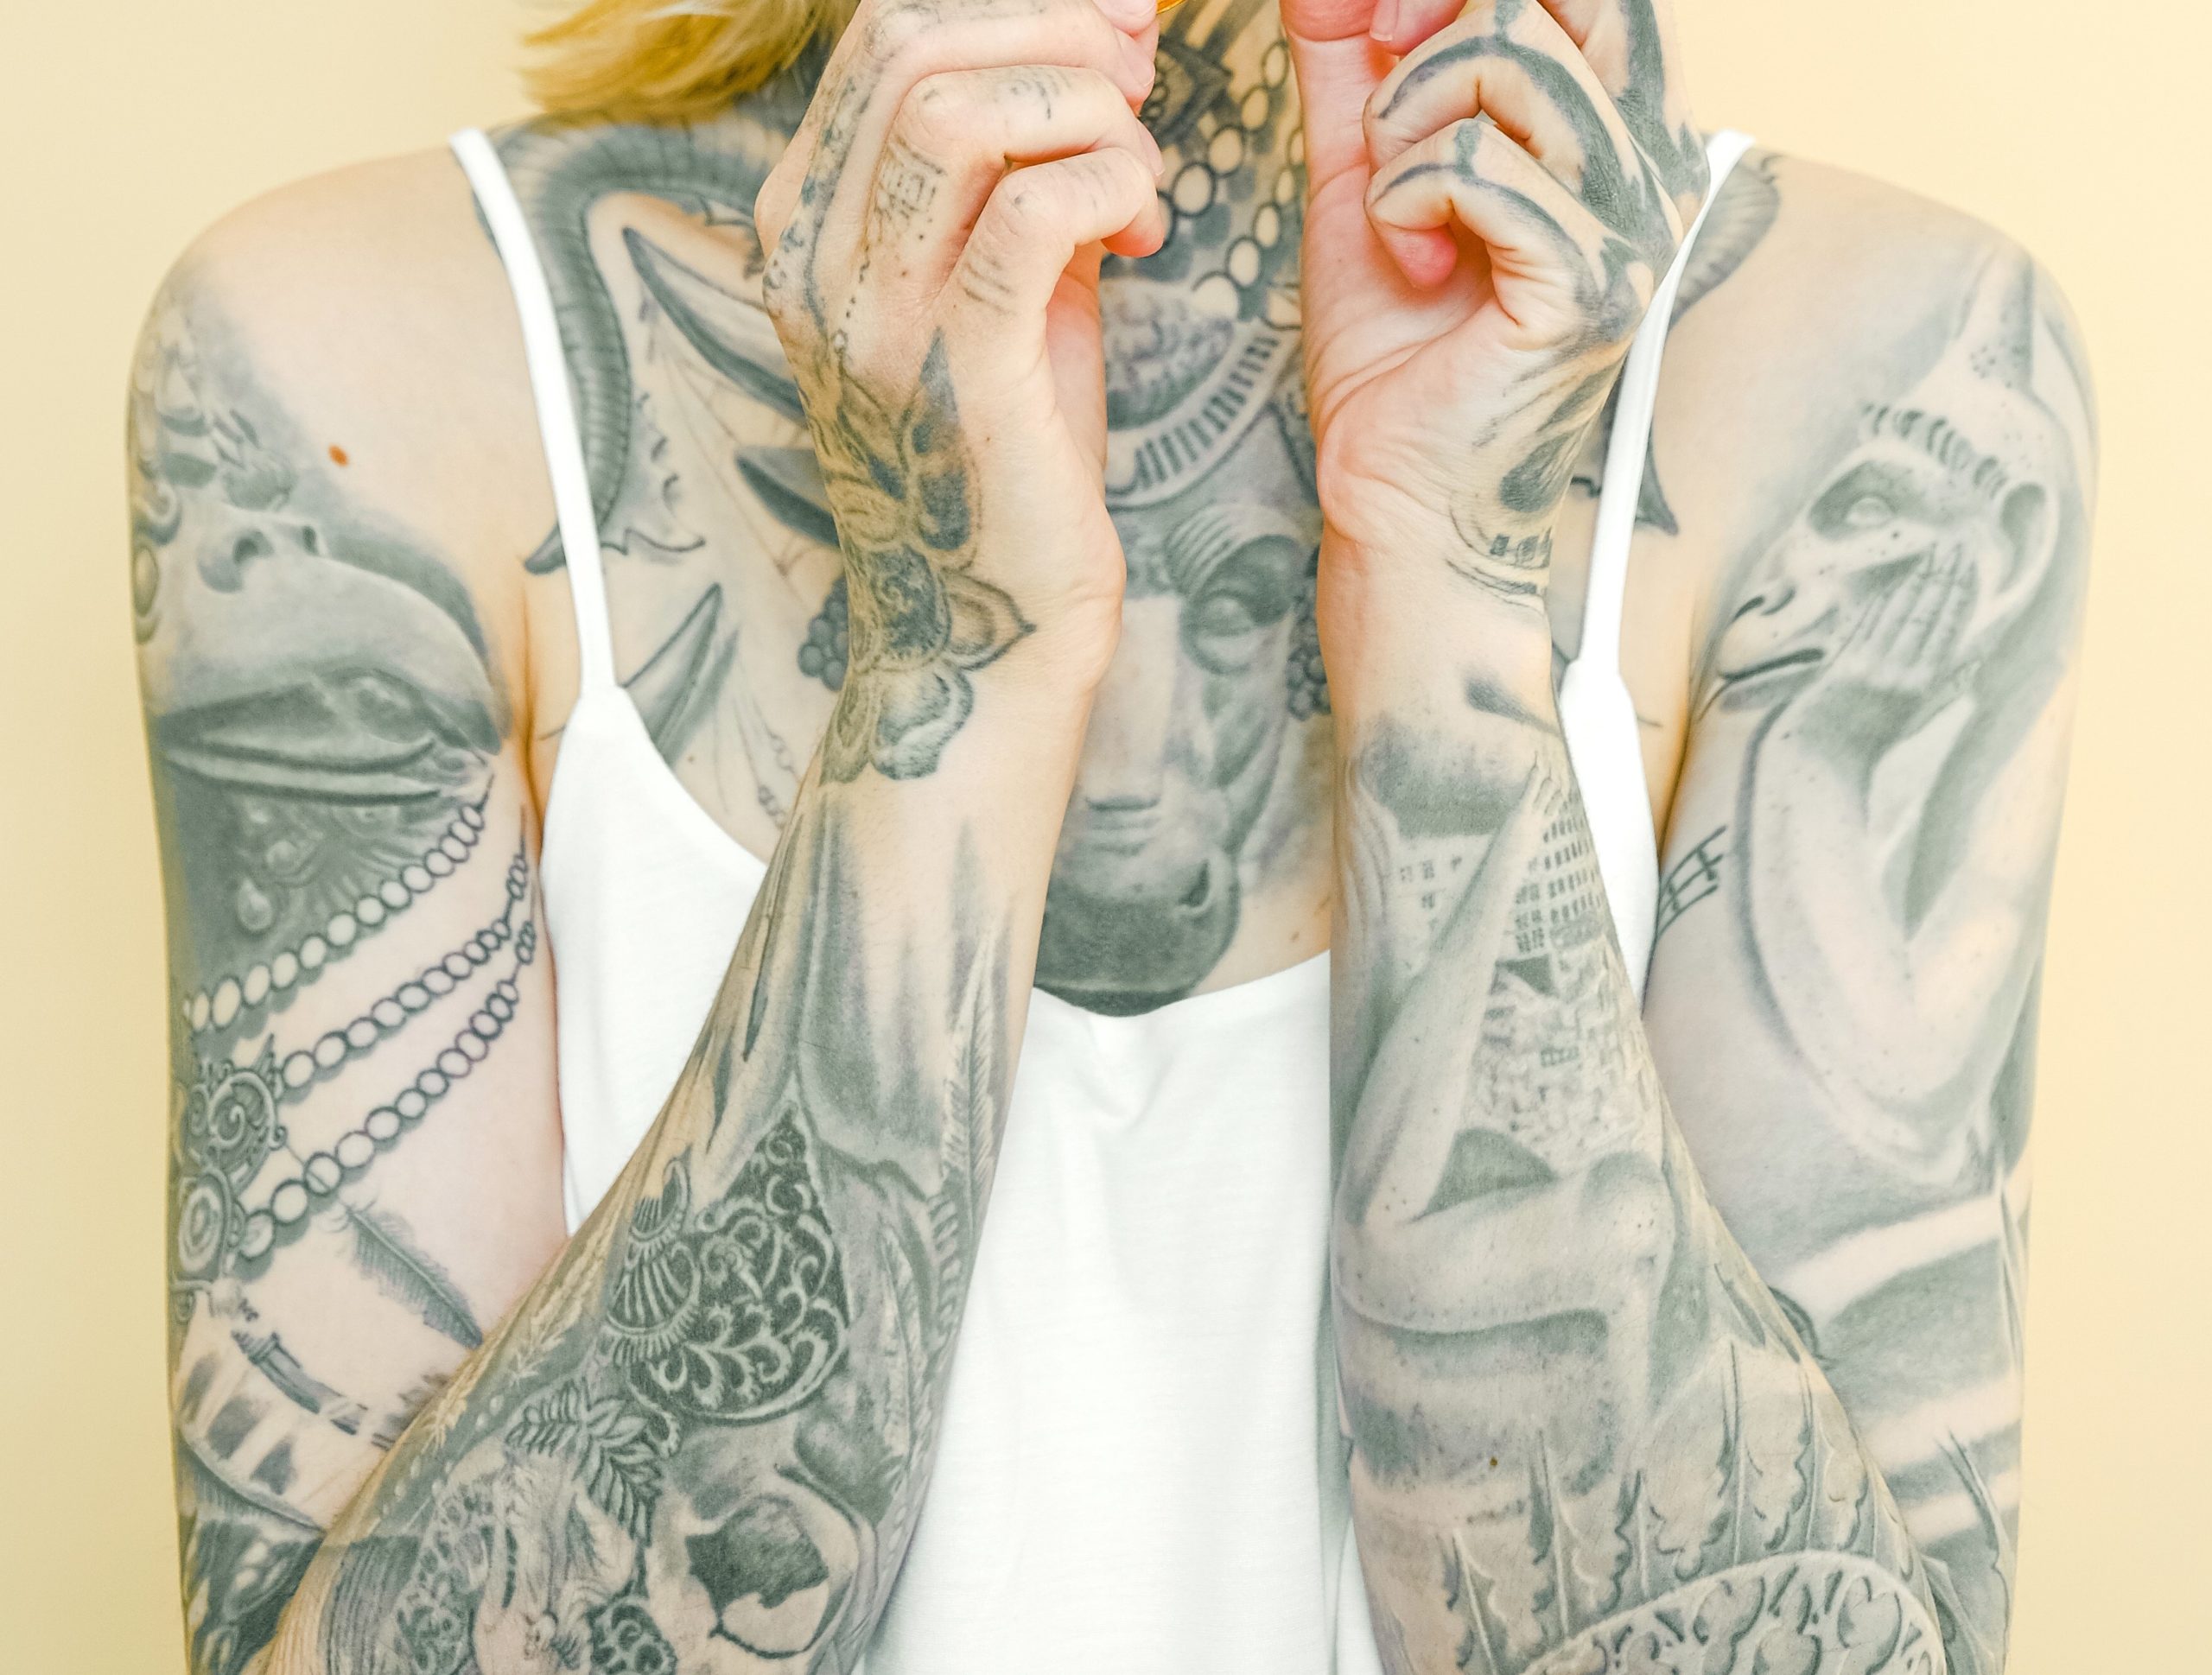 Tattooed girl's arms with custom black and grey realistic sleeves